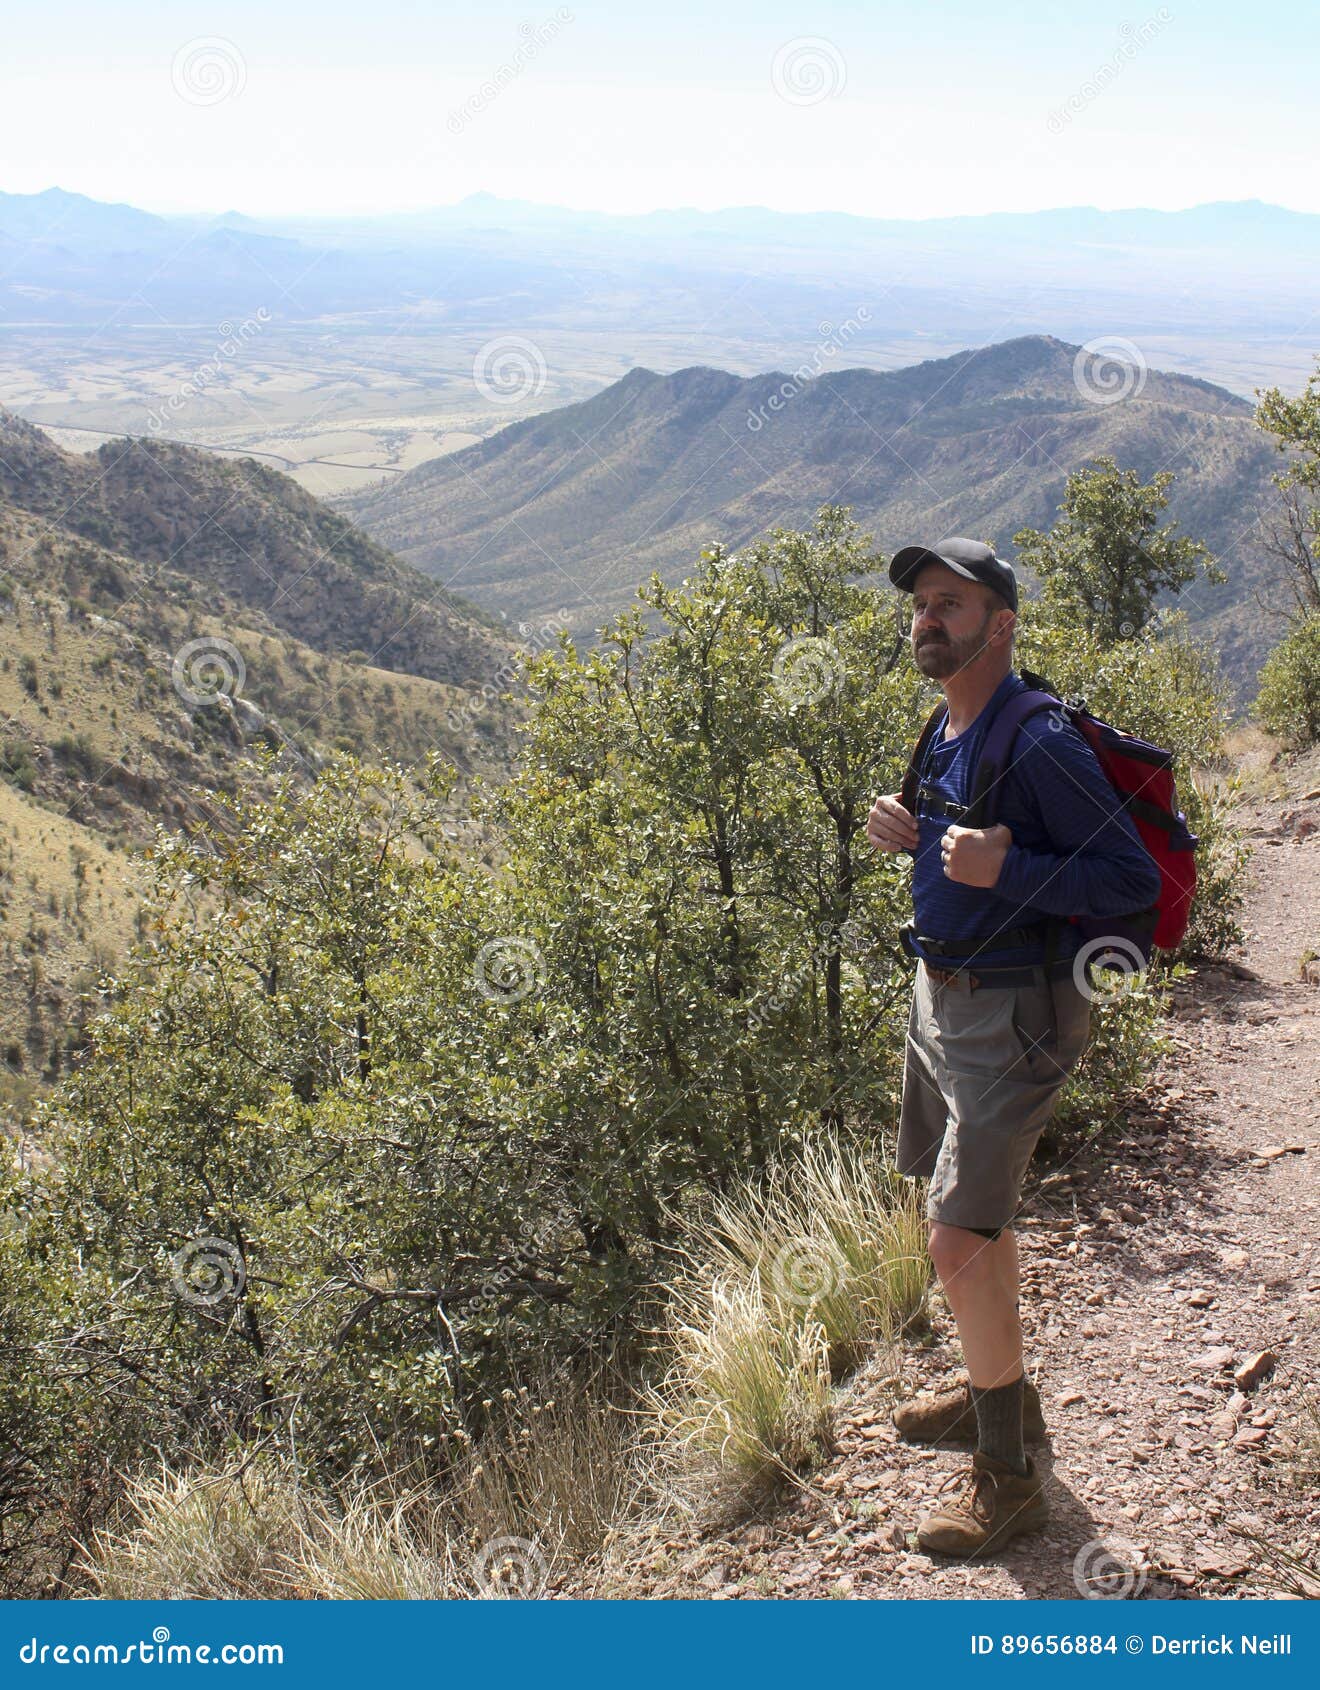 a hiker on the huachuca mountain crest trail